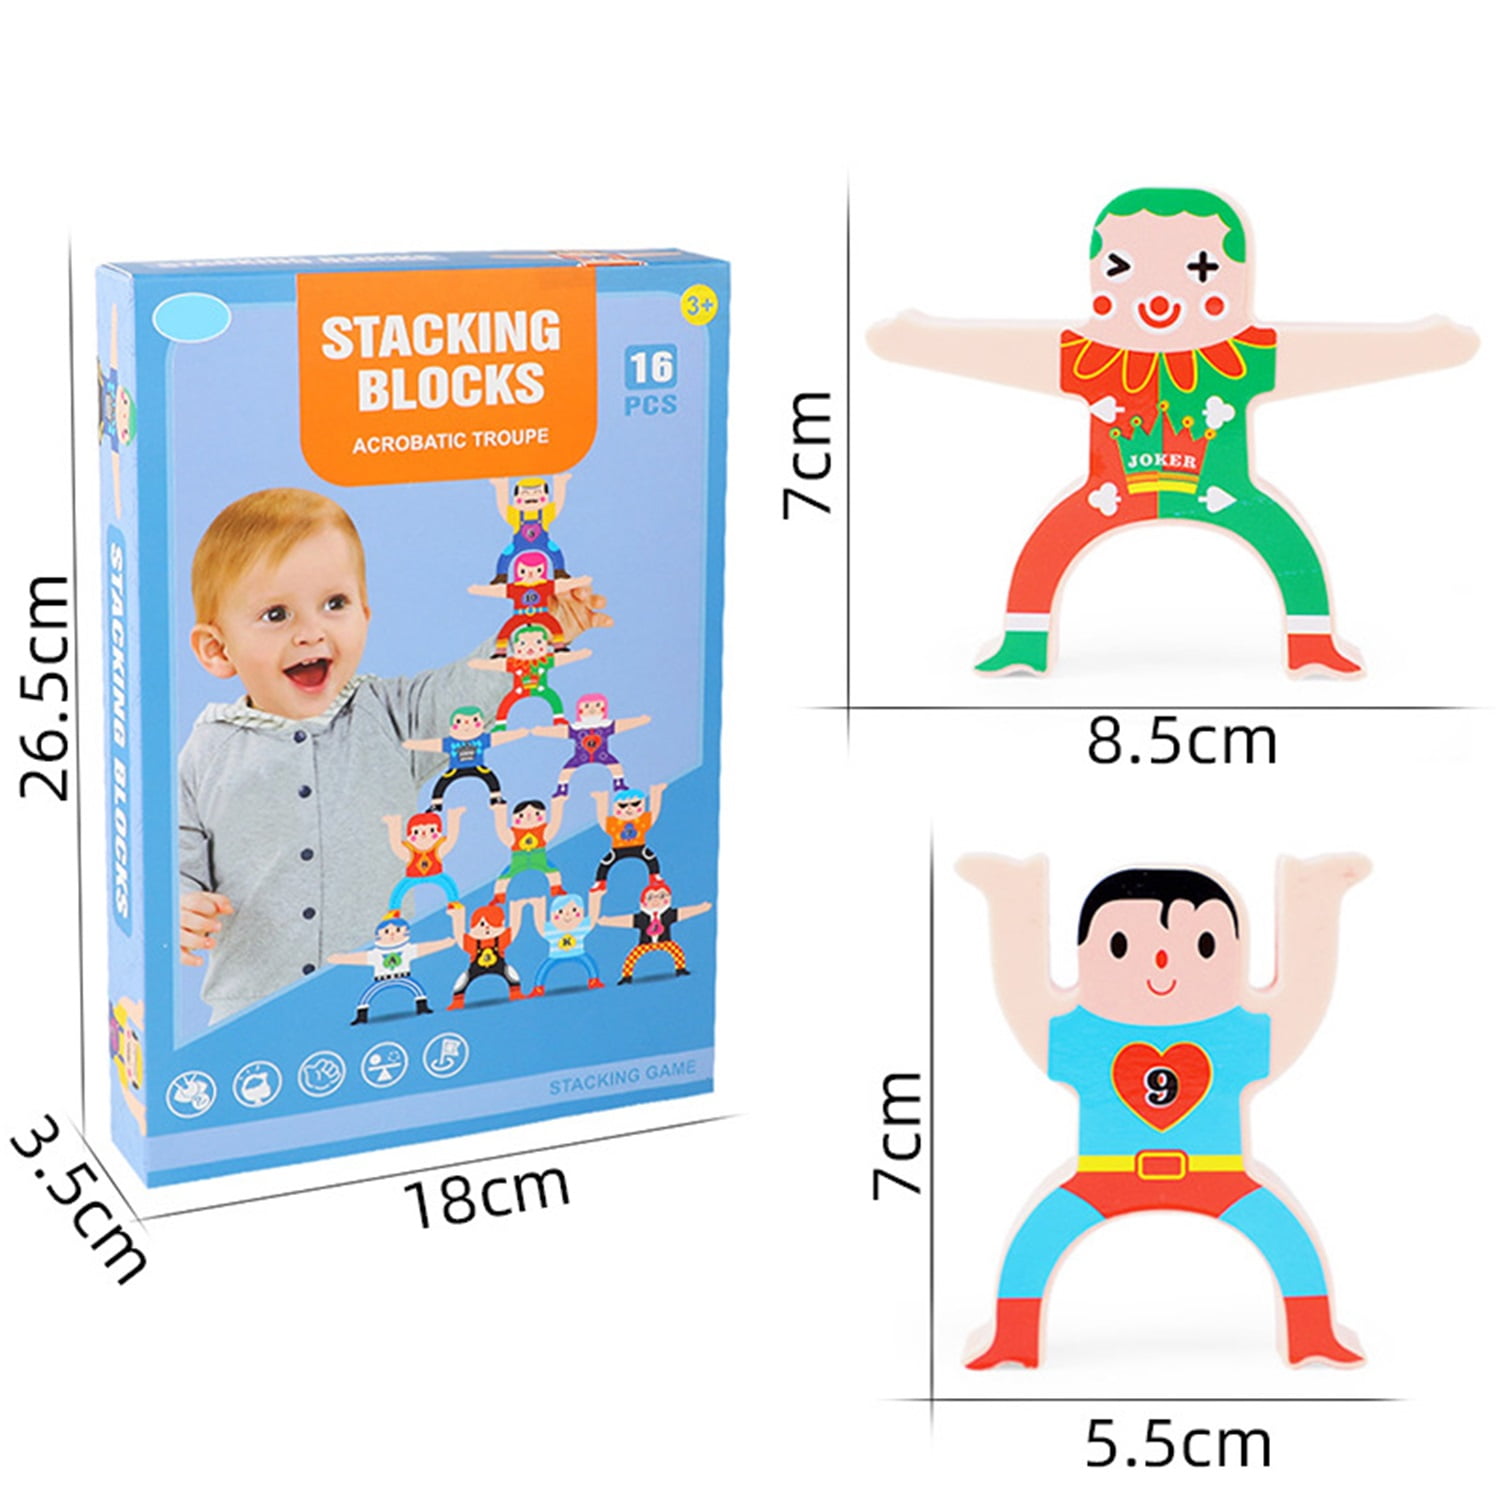 Ealing Wooden Hercules Building Stacking Game Educational Developmental Learning Toys for Kids Baby Toddlers 3 4 5 Years Old and Up 16 PCS